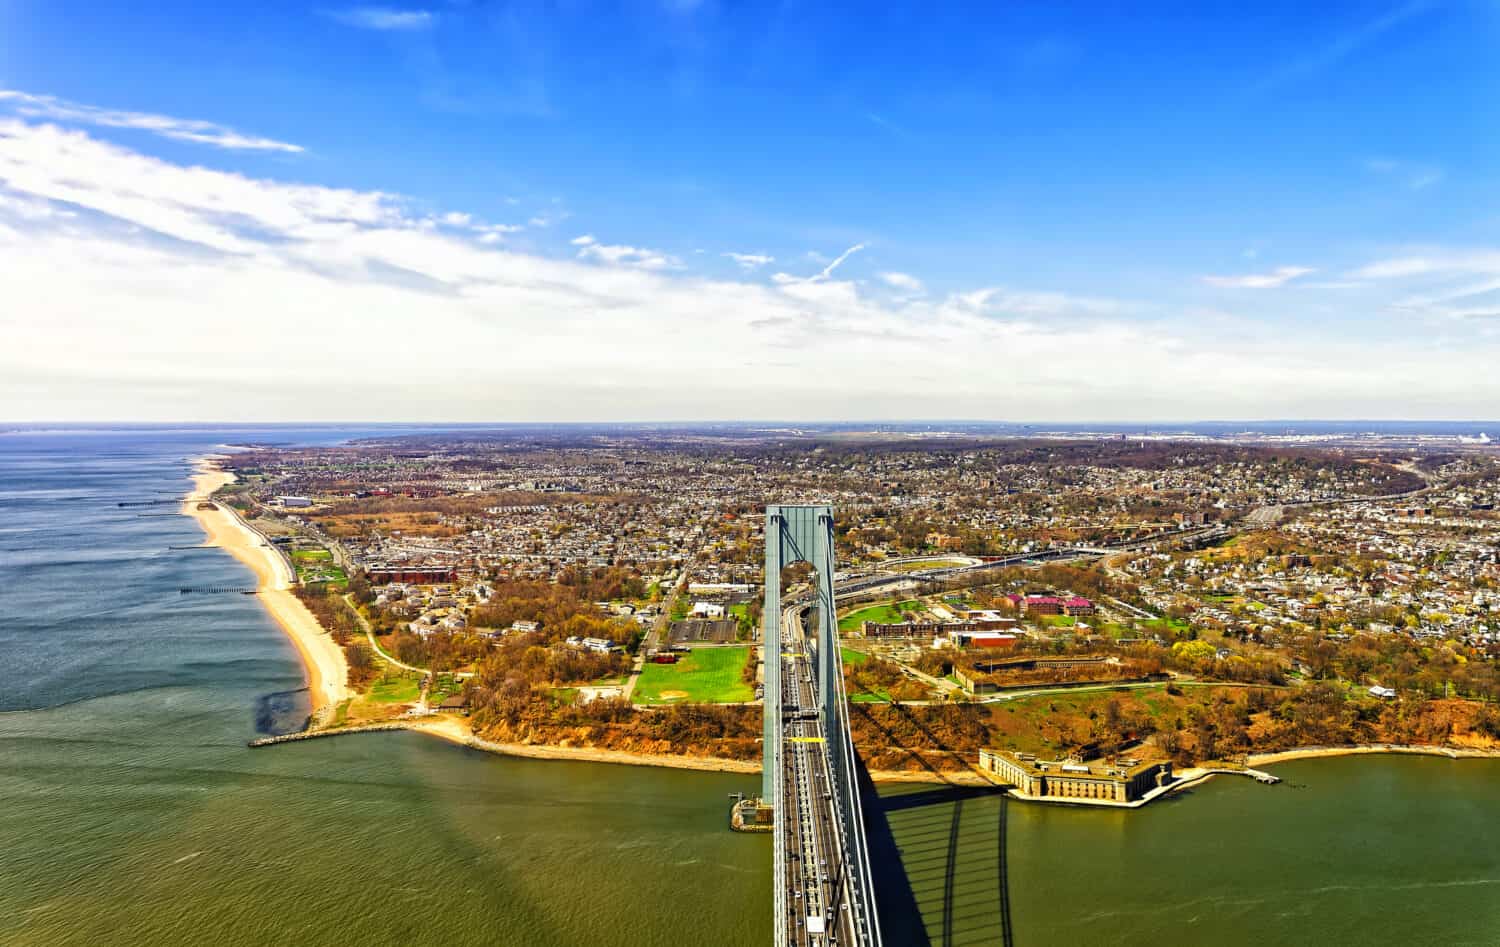 Aerial view of Verrazano-Narrows Bridge over Narrows. It connects Brooklyn and Staten Island. It is strait connects Upper Bay with Lower Bay. View on Fort Wadsworth Bunker and Light in Staten Island